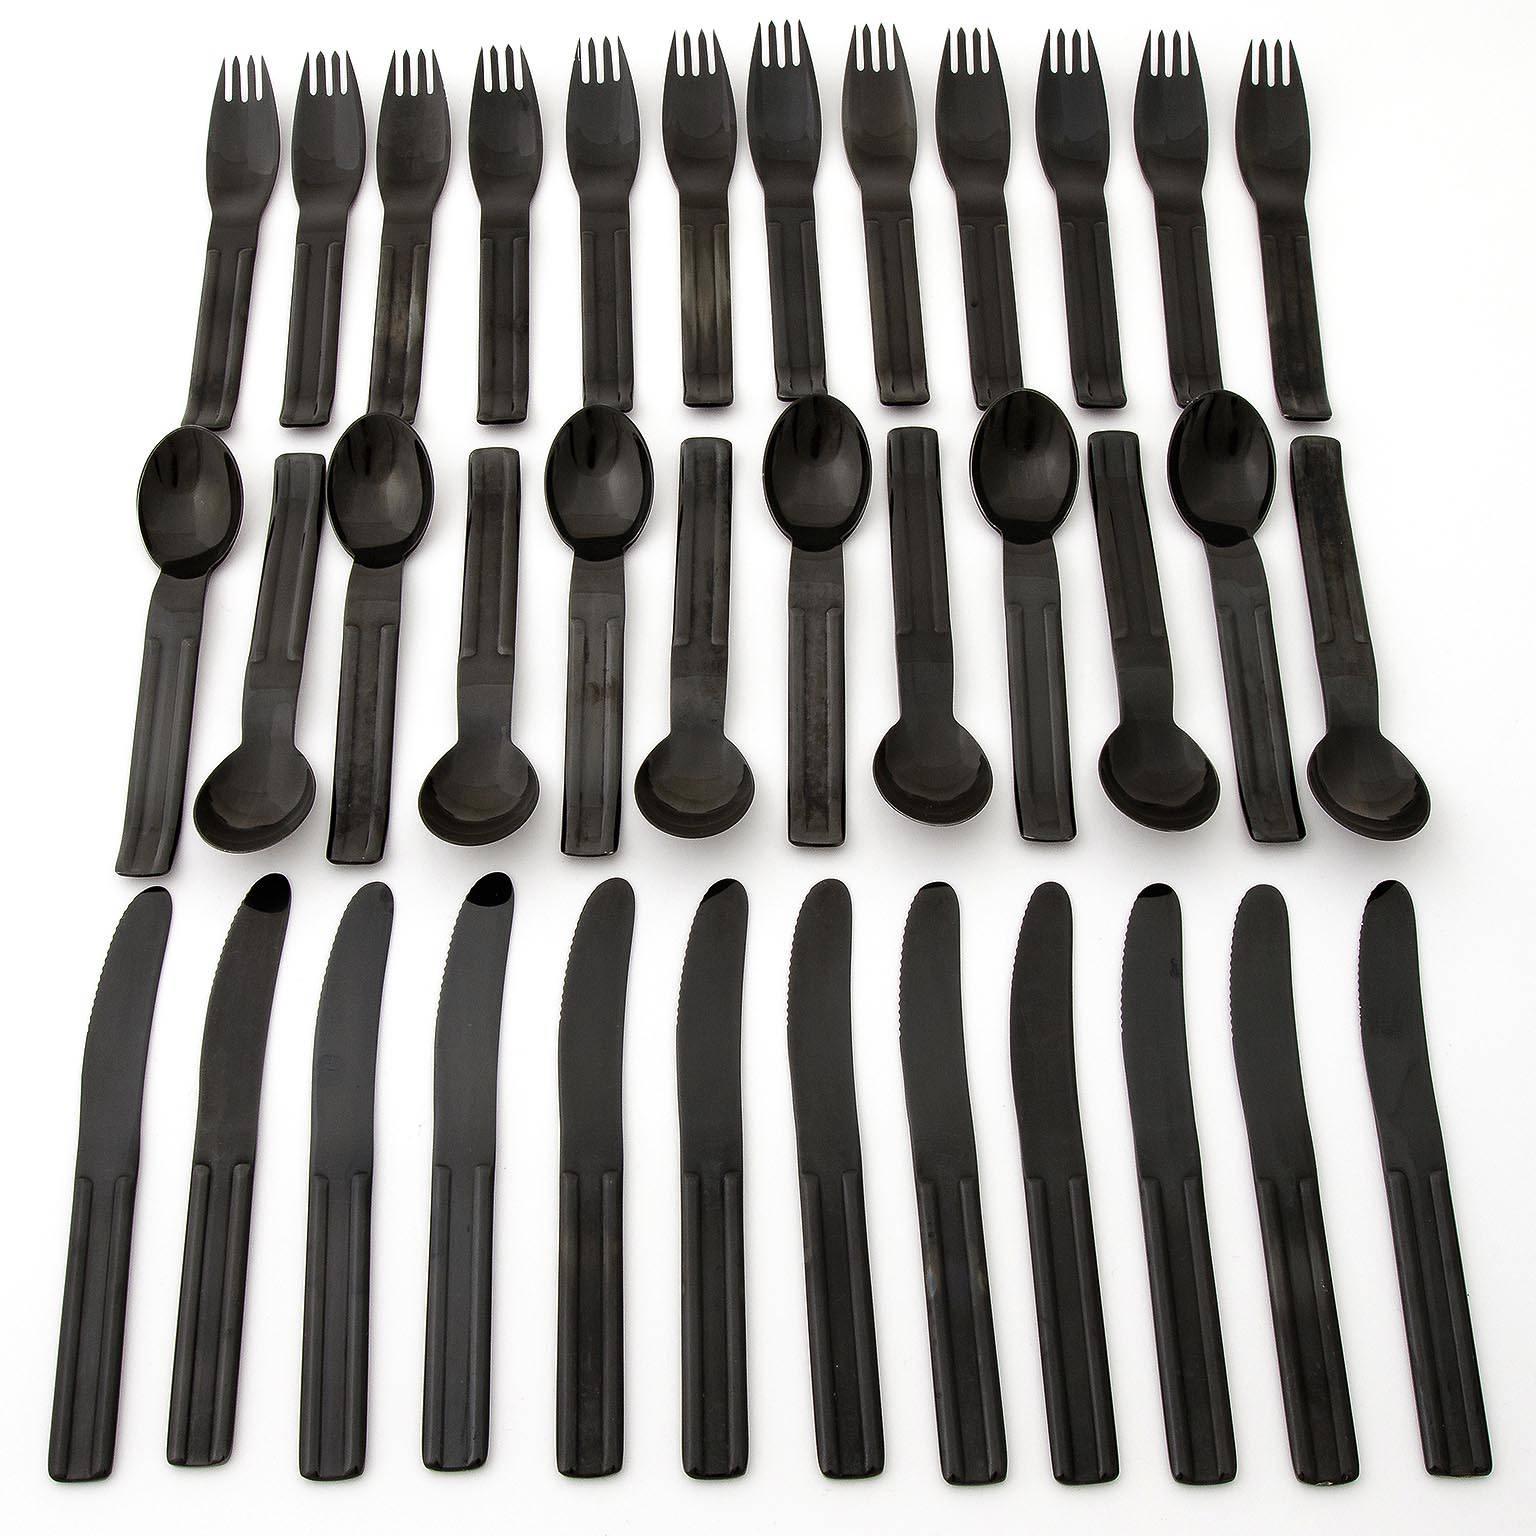 A gorgeous set of a black flatware / cutlery from the Culinar-series for 12 people designed by Carl Auboeck for Ostovics, manufactured by Collini Austria, circa 1980. It is made of blackened stainless steel.
Each piece is marked on the back with